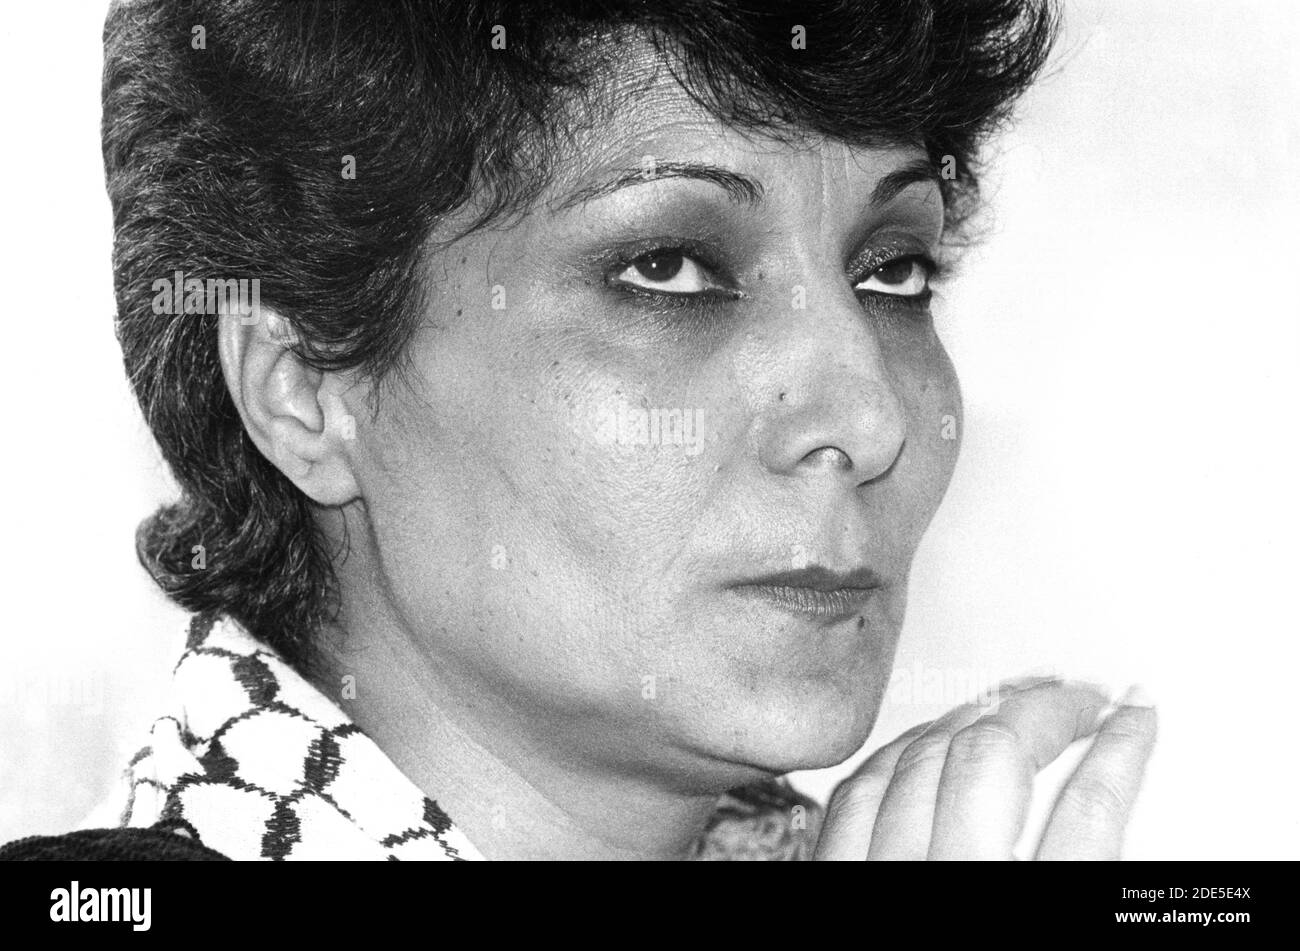 LEILA KHALED, former militant guerrilla, a member of the Palestinian National Council, member of the PFLP (Popular Front for the Liberation of Palestine). Leila Khaled became famous through airplane hijackings in 1969 and 1970. Photographed May 1988 in Tripolis, Libya. Stock Photo